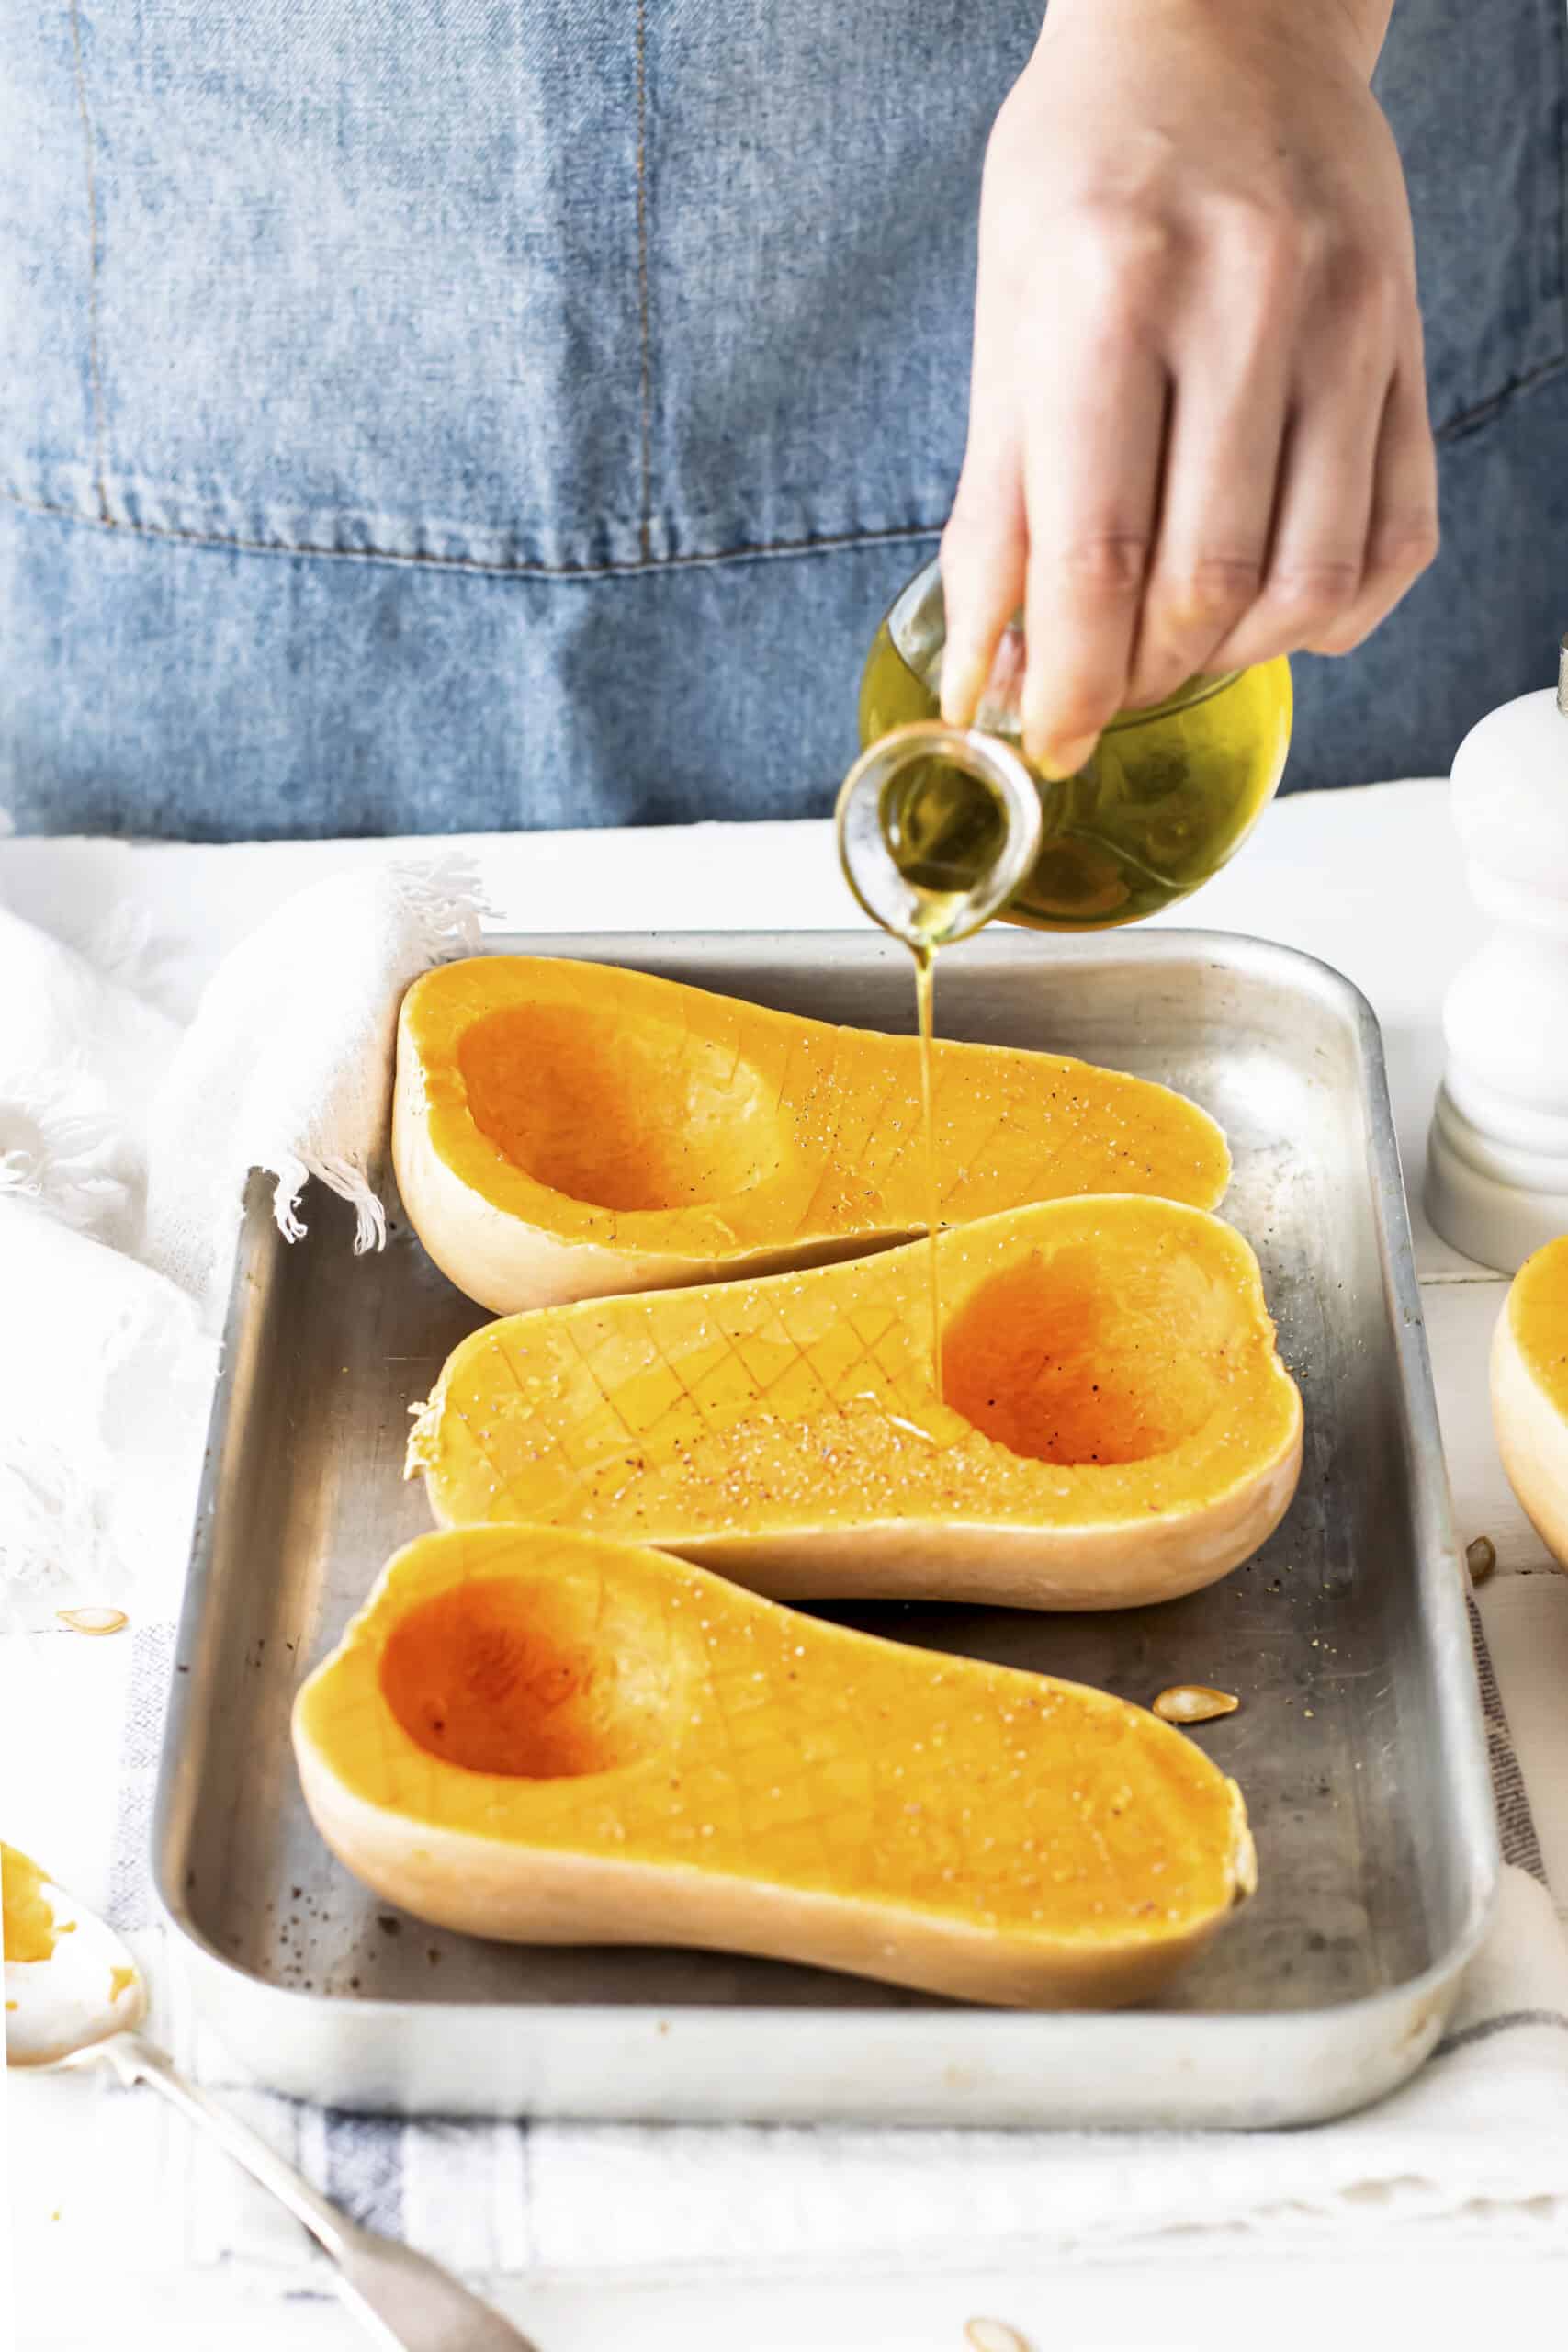 How To Cook Honeynut Squash